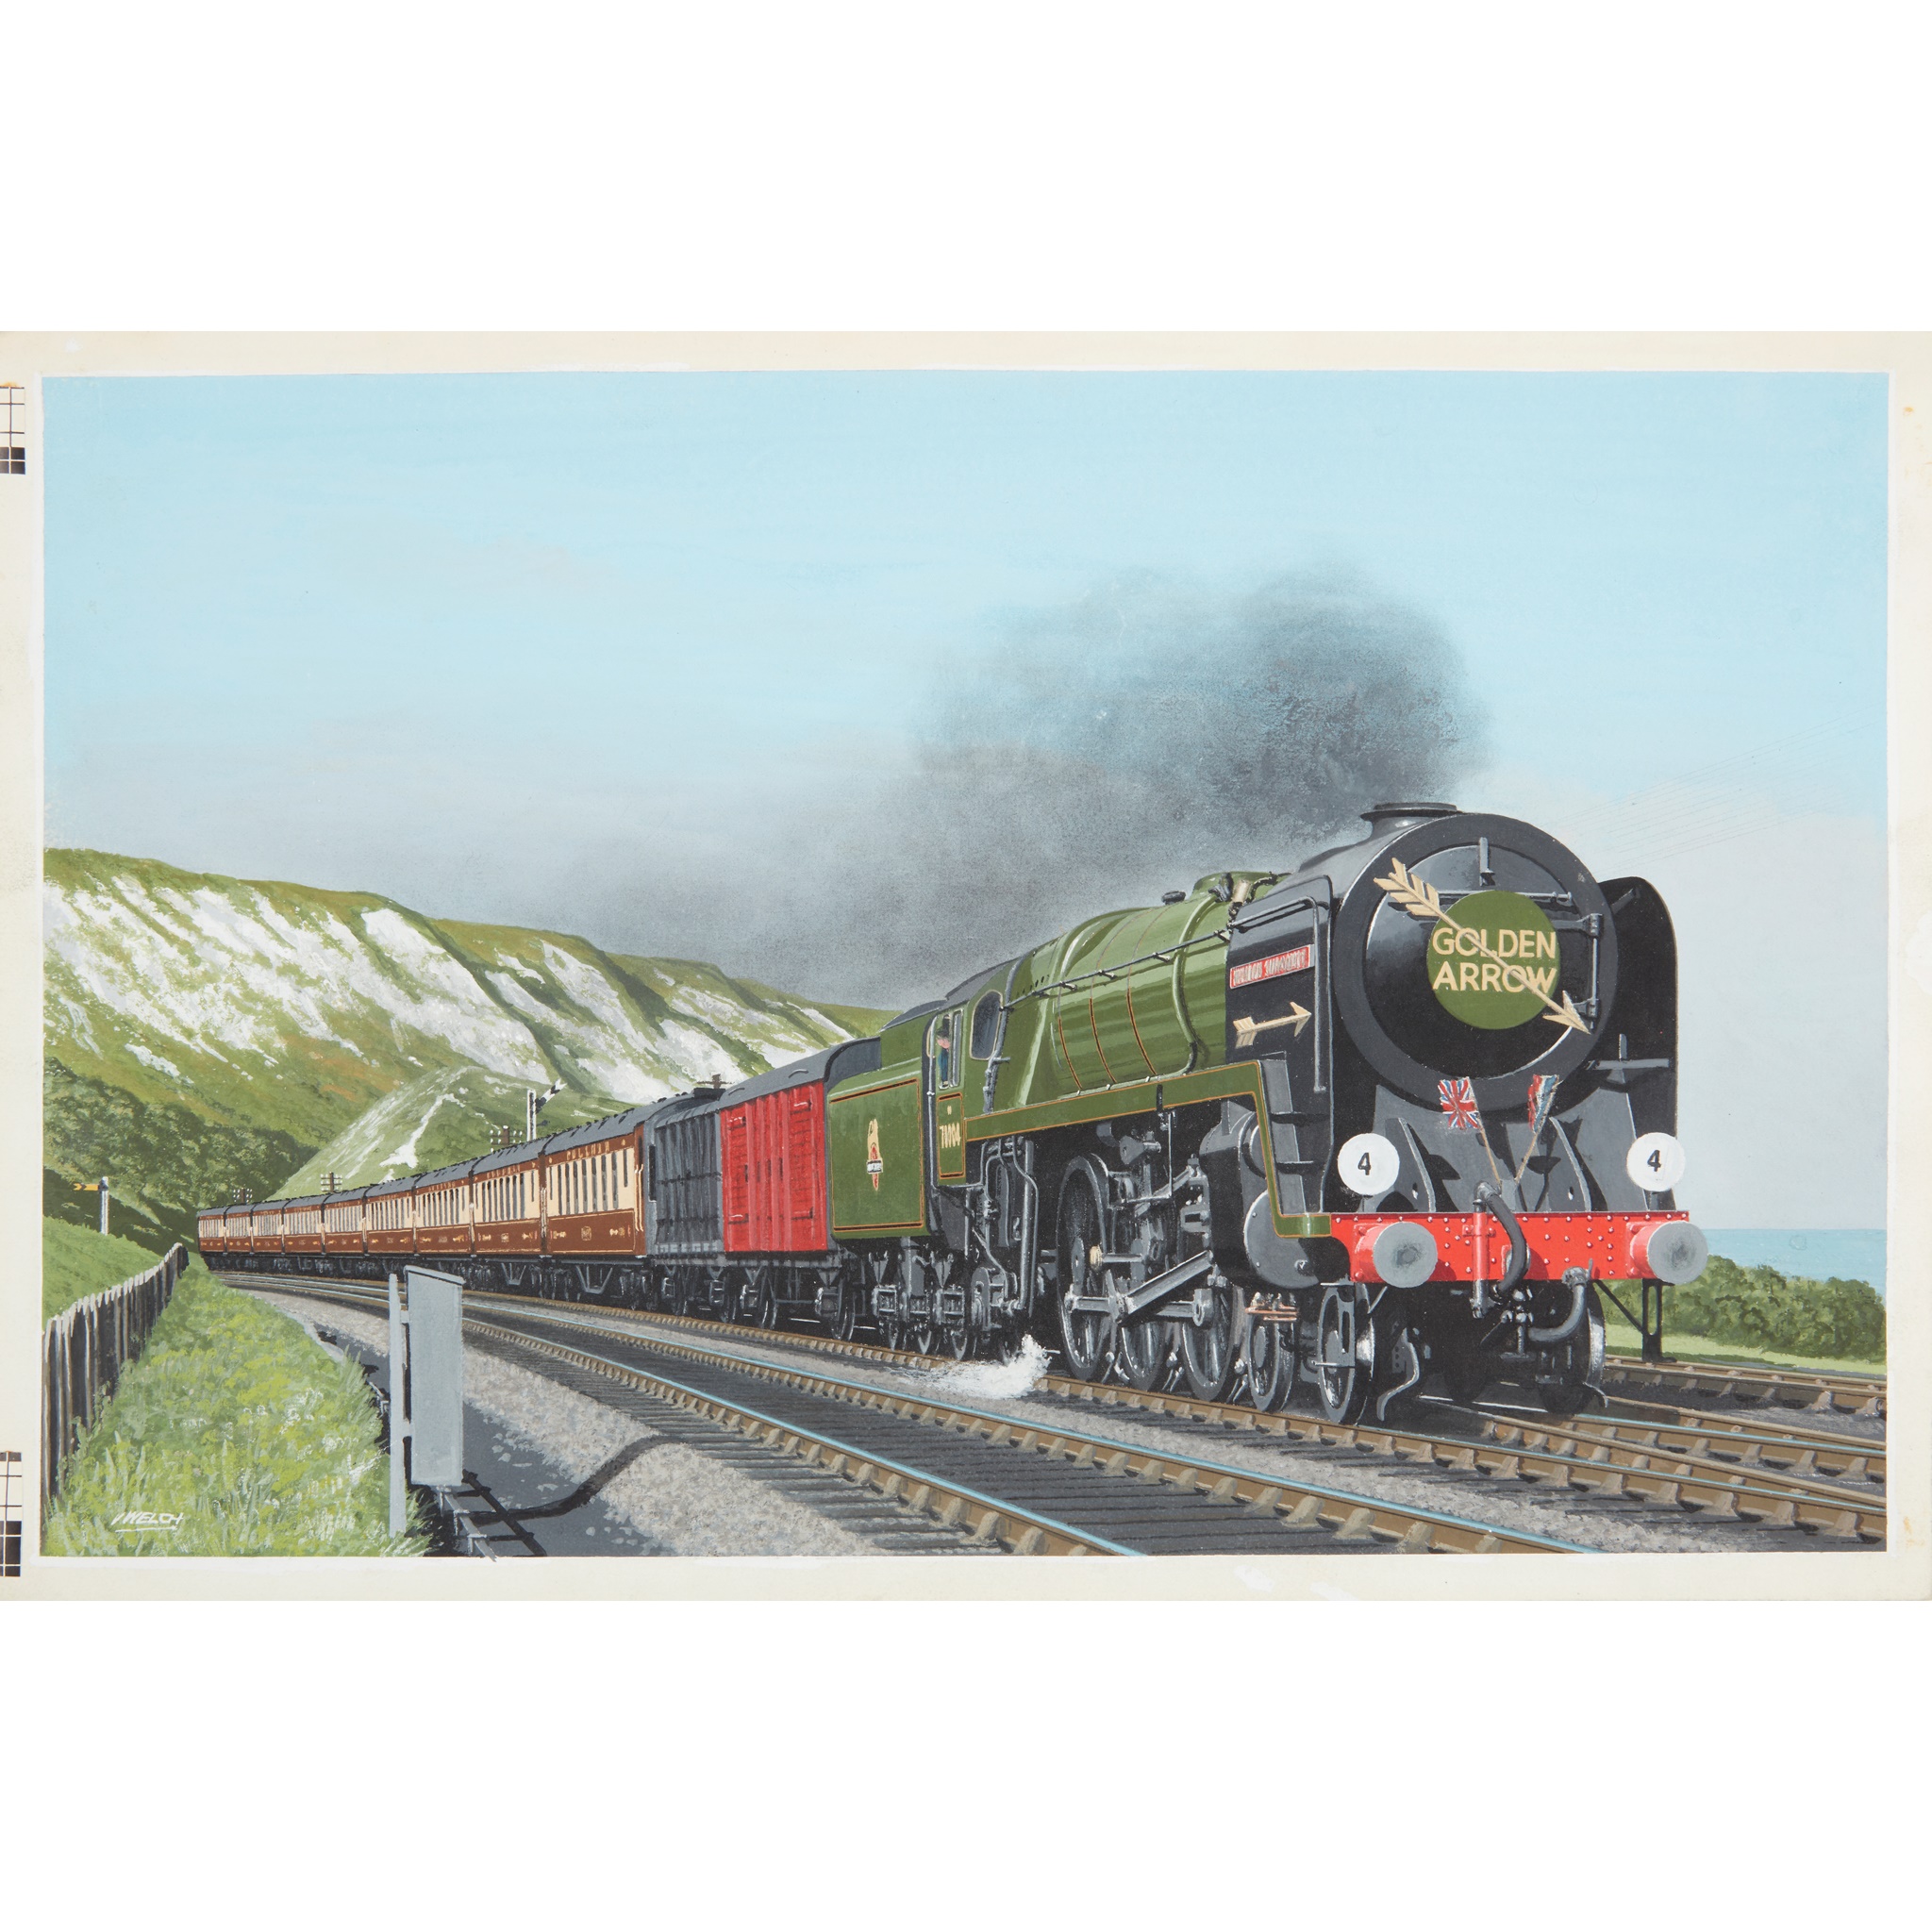 Welch, Victor [Nock, O.S.] 7 illustrations from 'Steam Railways in Retrospect'